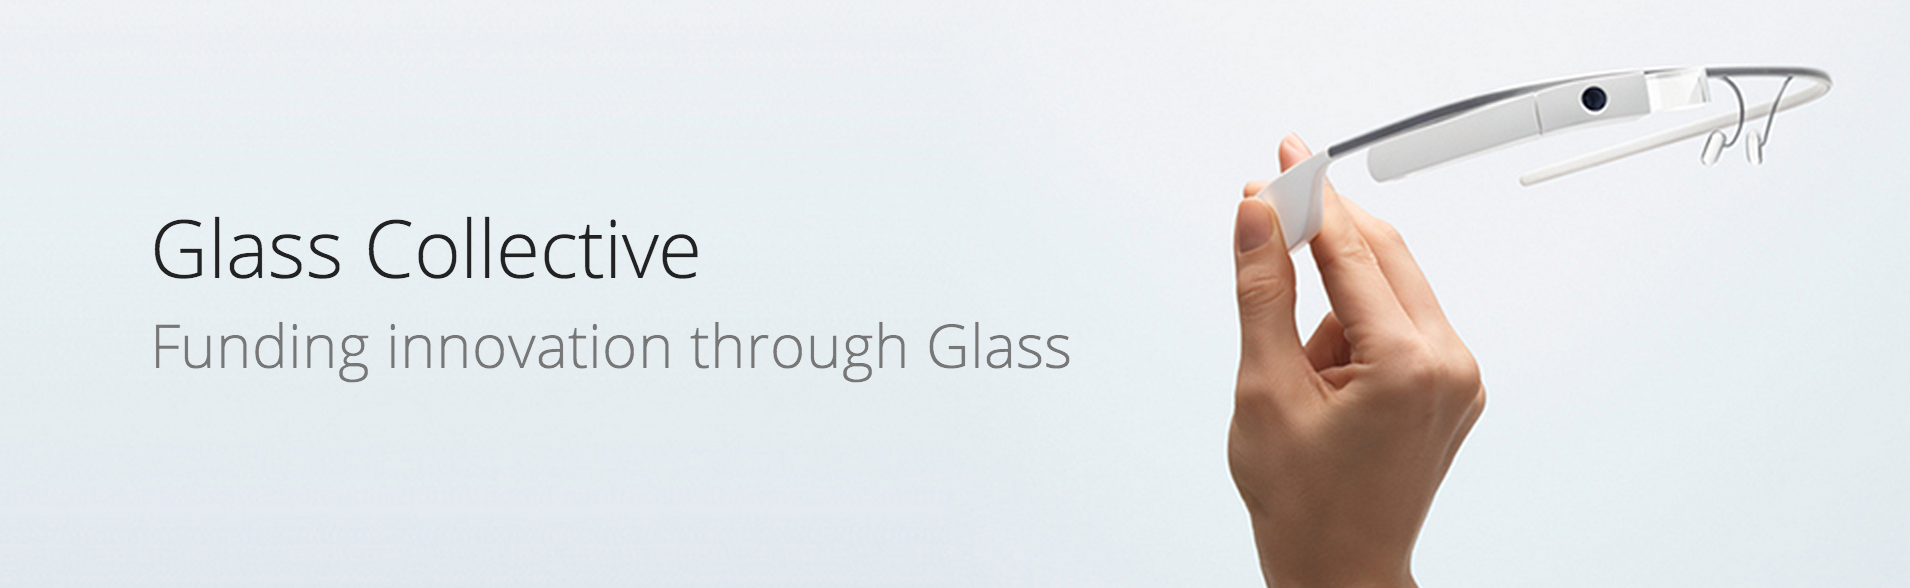 Glass-Collective-seed-fund